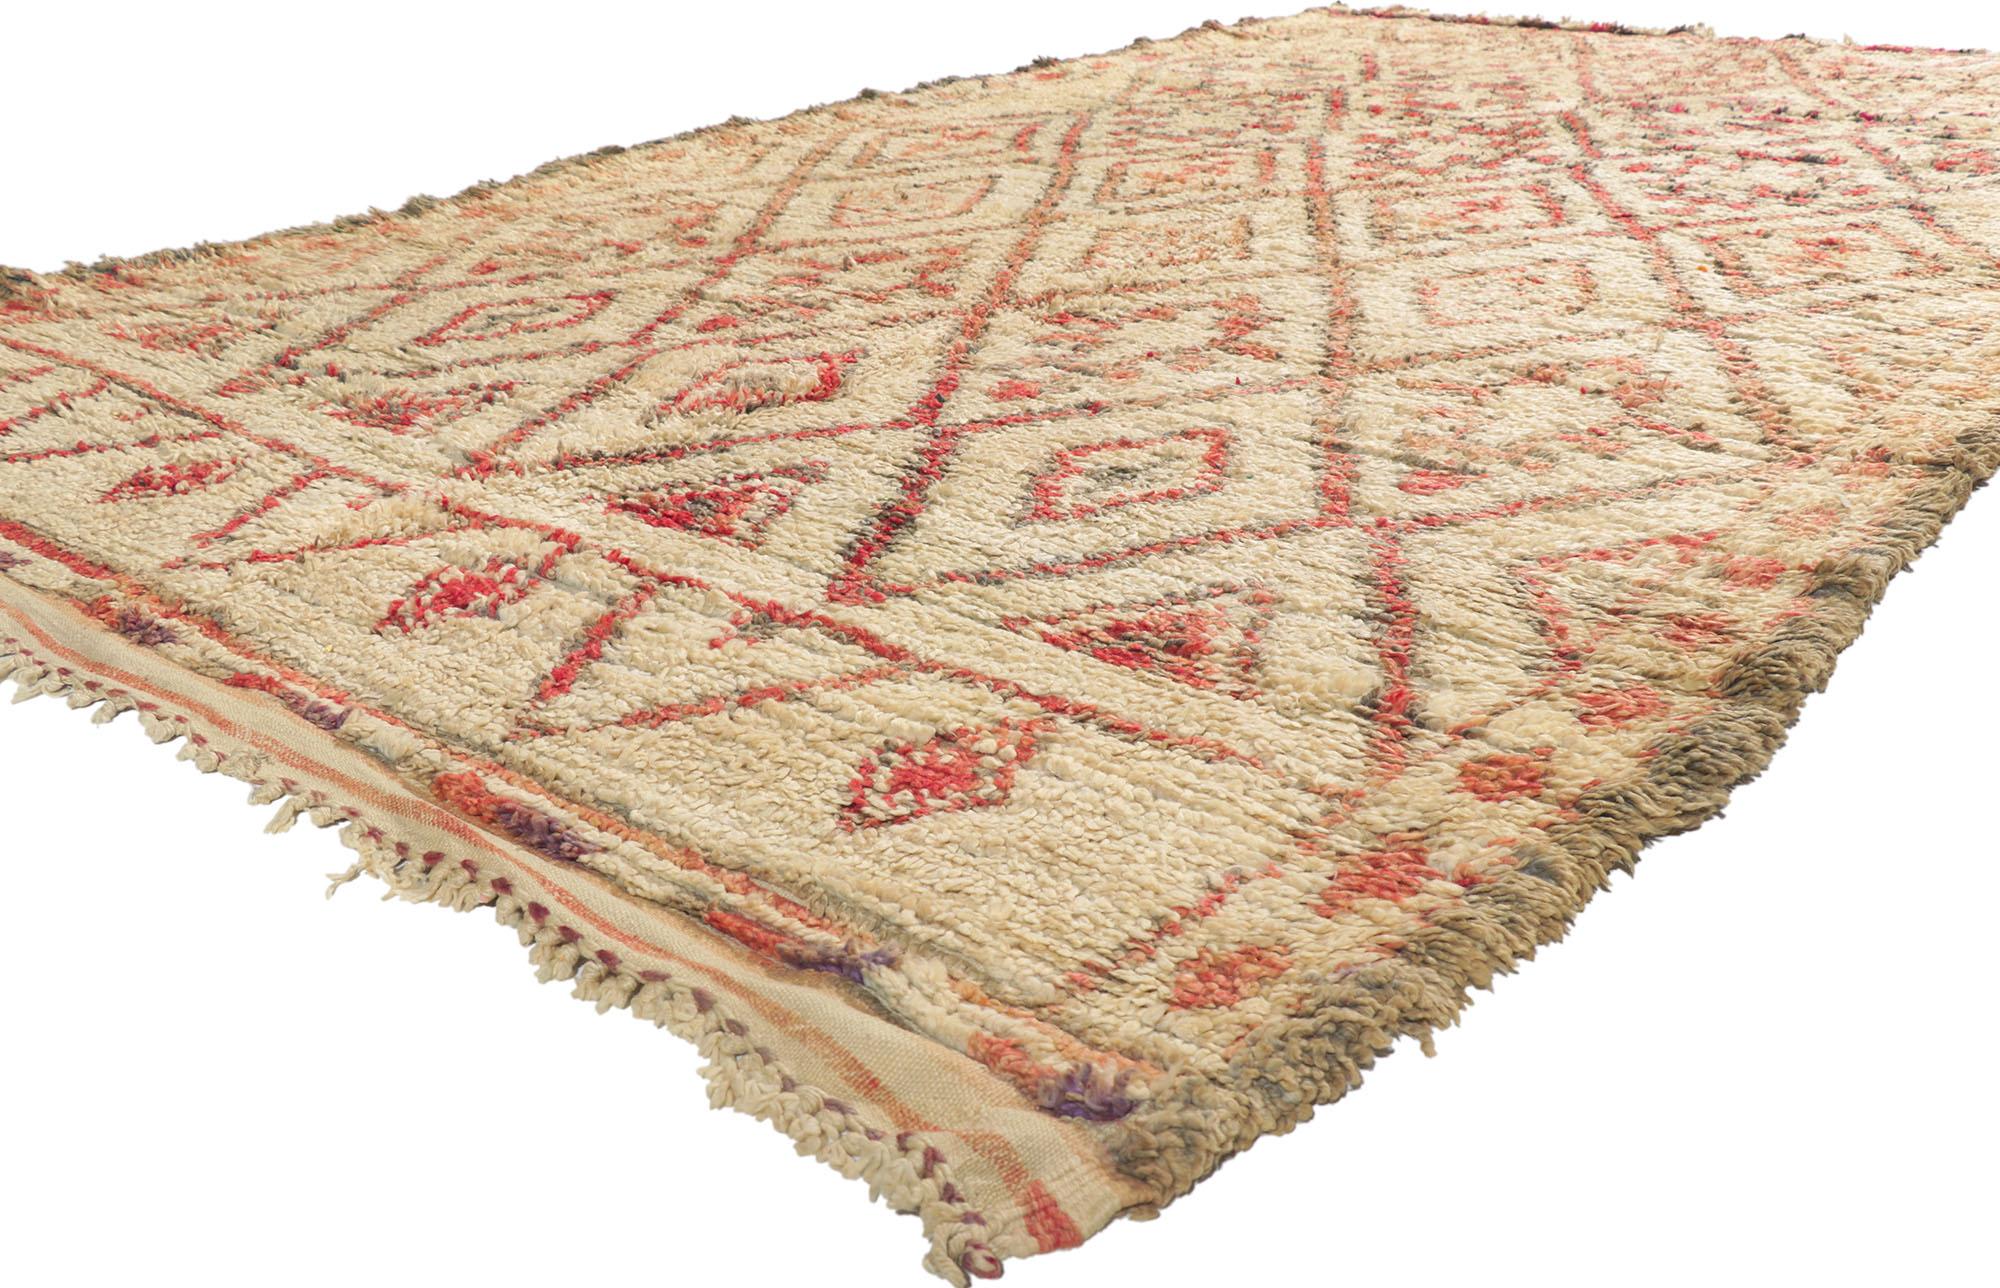 21396 Vintage Moroccan Beni Ourain Rug, 06'05 x 10'06.
With its simplicity, plush pile and tribal style, this hand knotted wool vintage Berber Beni Ourain Moroccan rug is a captivating vision of woven beauty. It features a diamond lattice composed